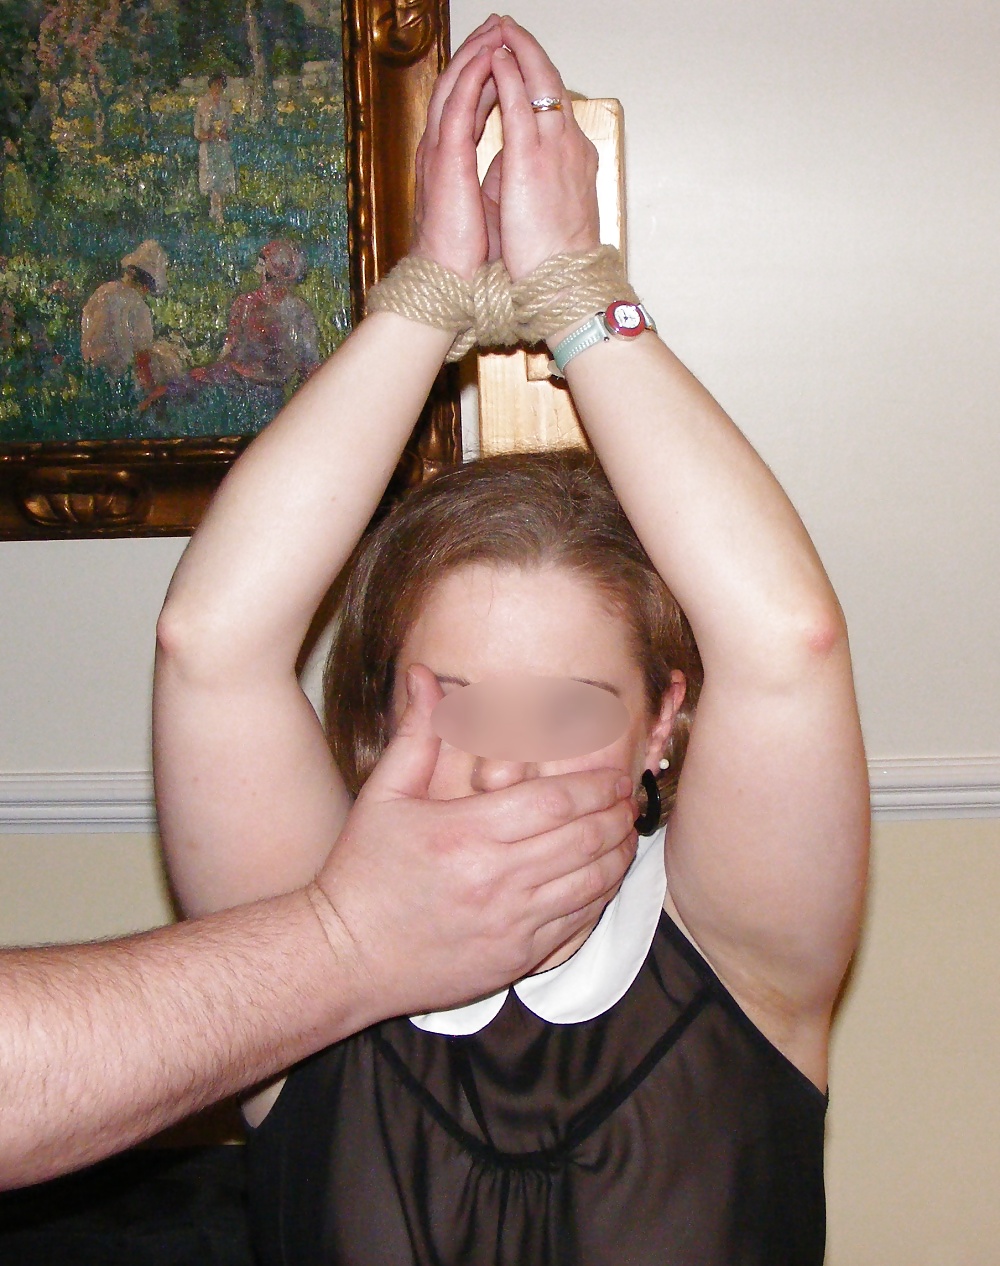 Bondage and caning at a fetish dinner party adult photos